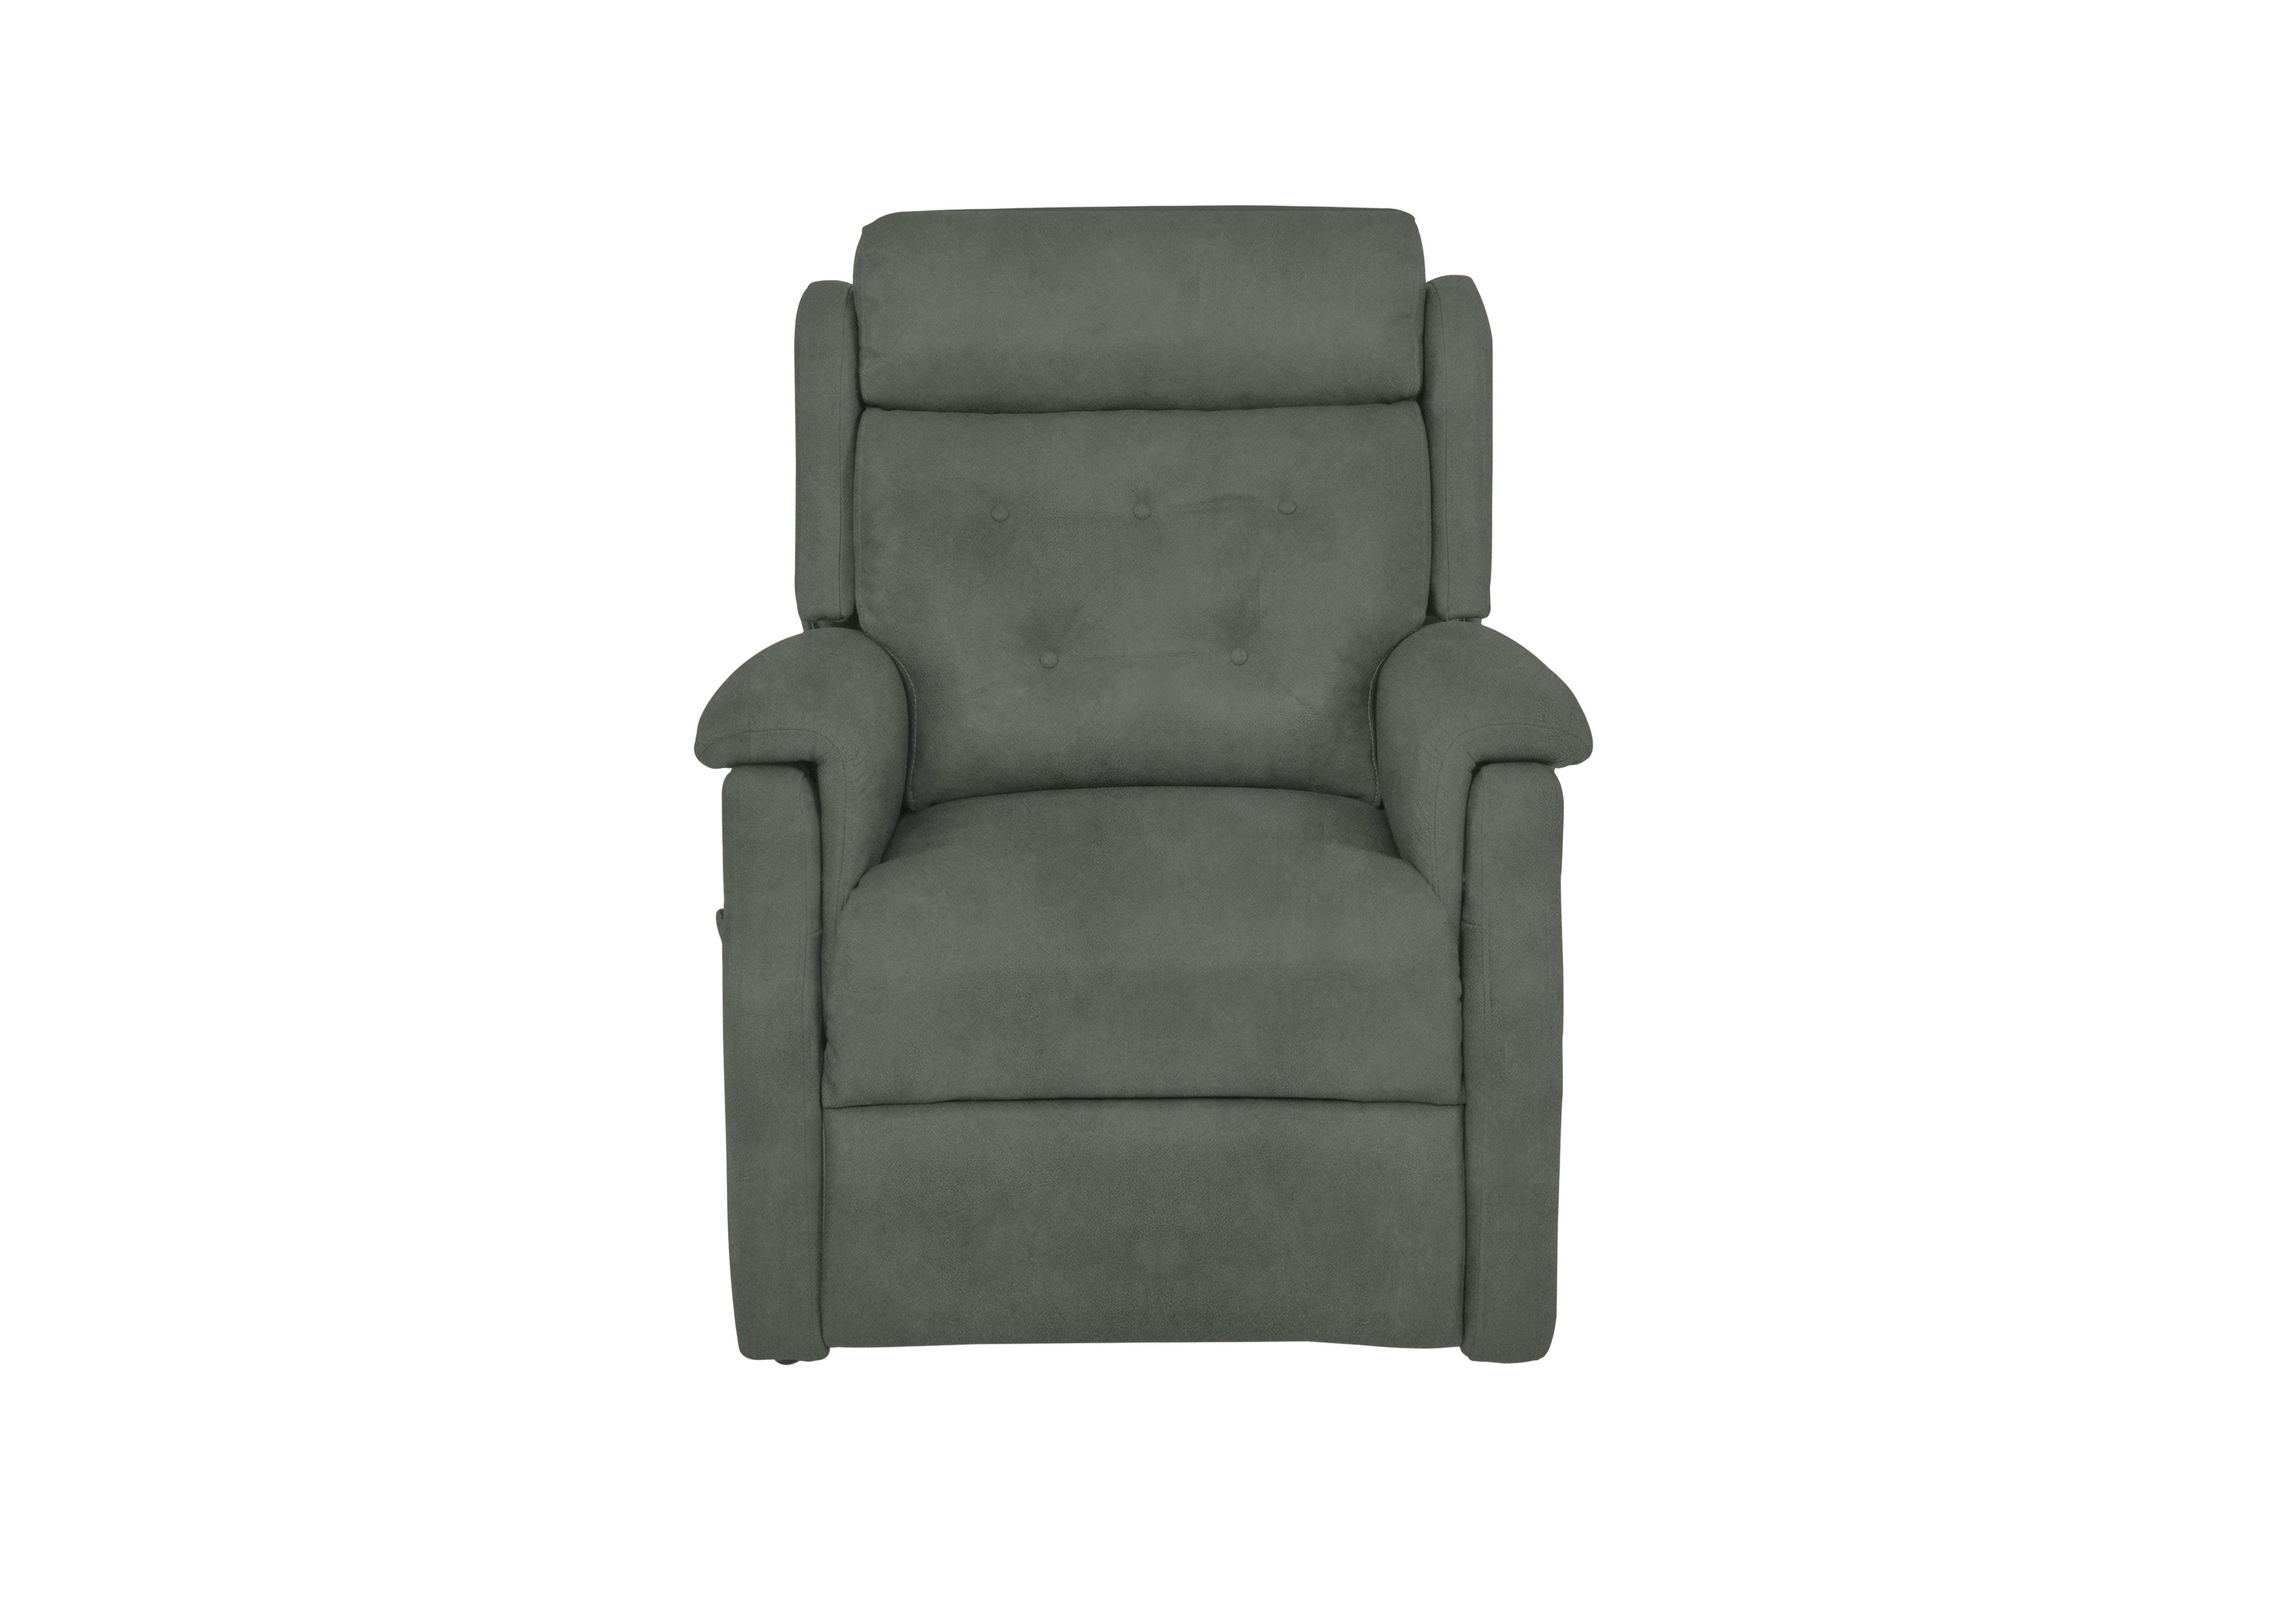 My Chair Scott Fabric Lift and Rise Chair in 43514 Fern Dexter 14 on Furniture Village